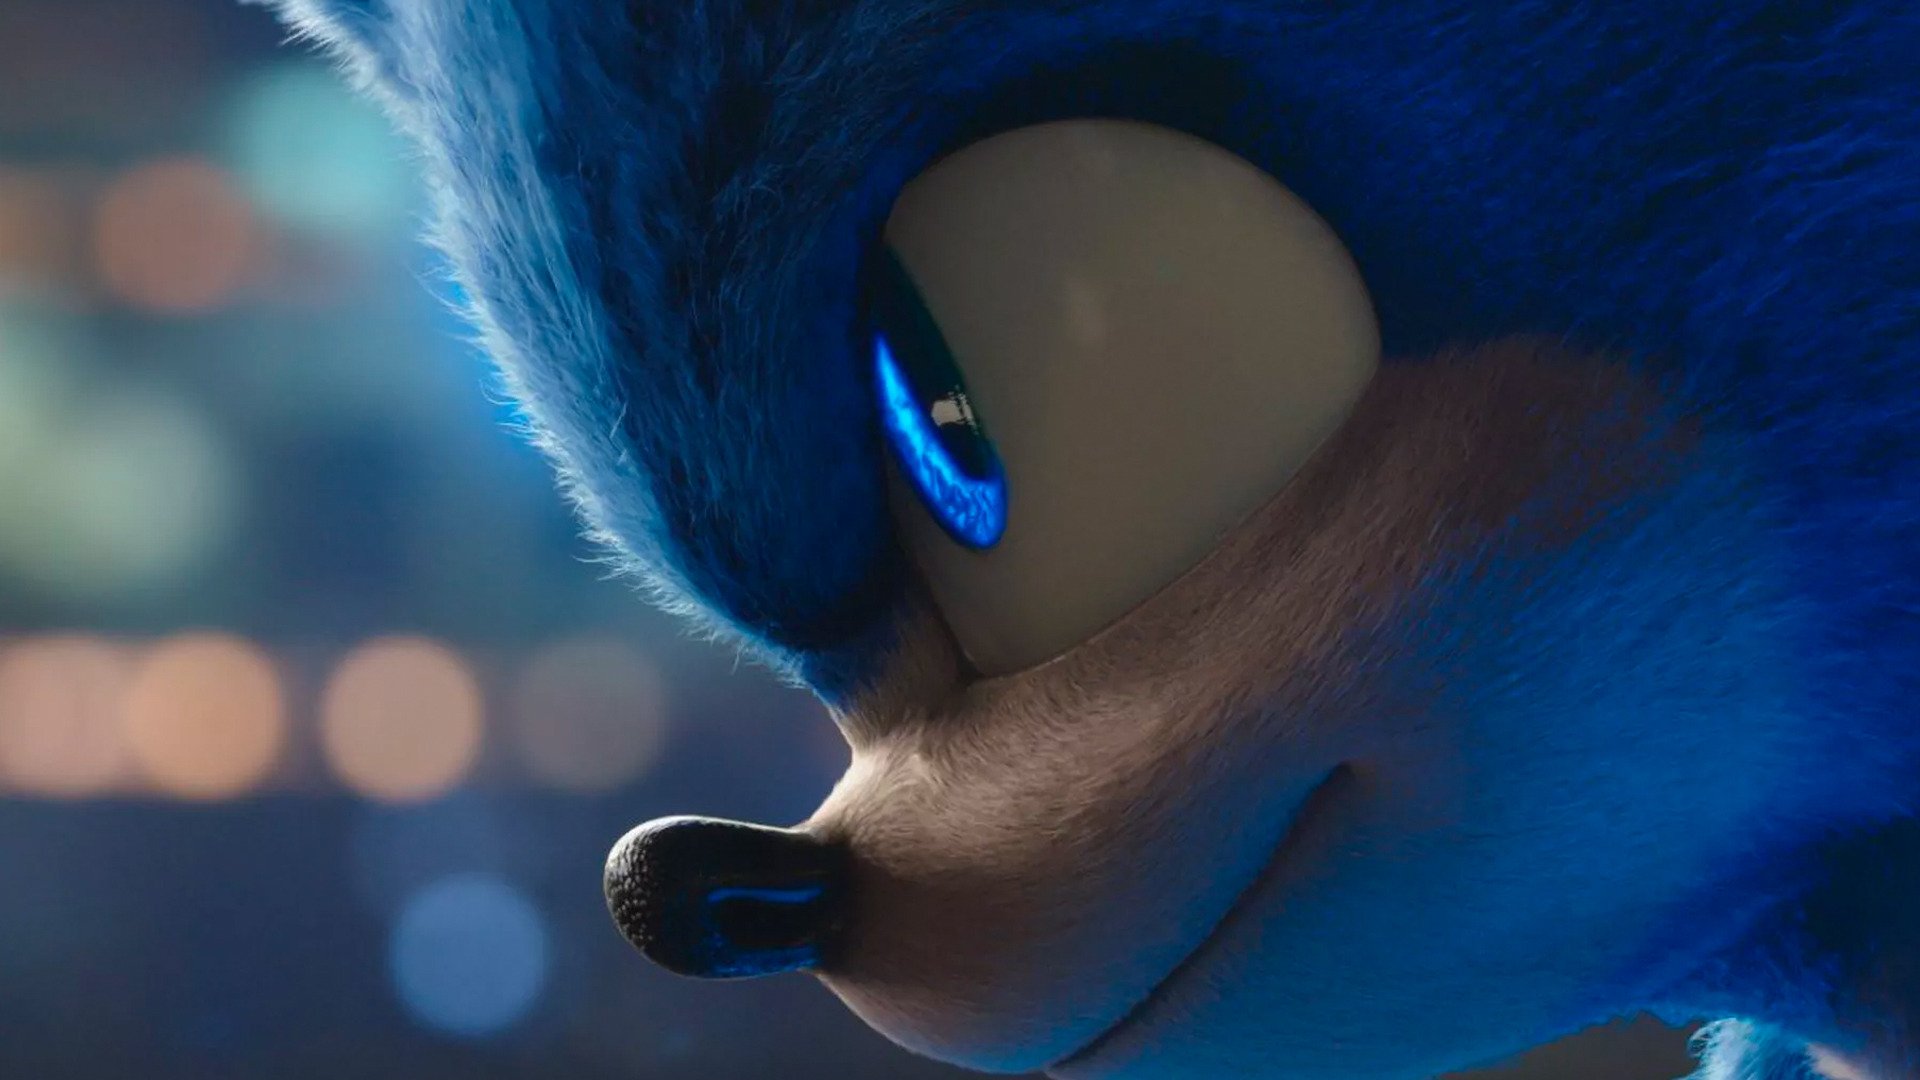 How Well Do You Know Sonic The Hedgehog?